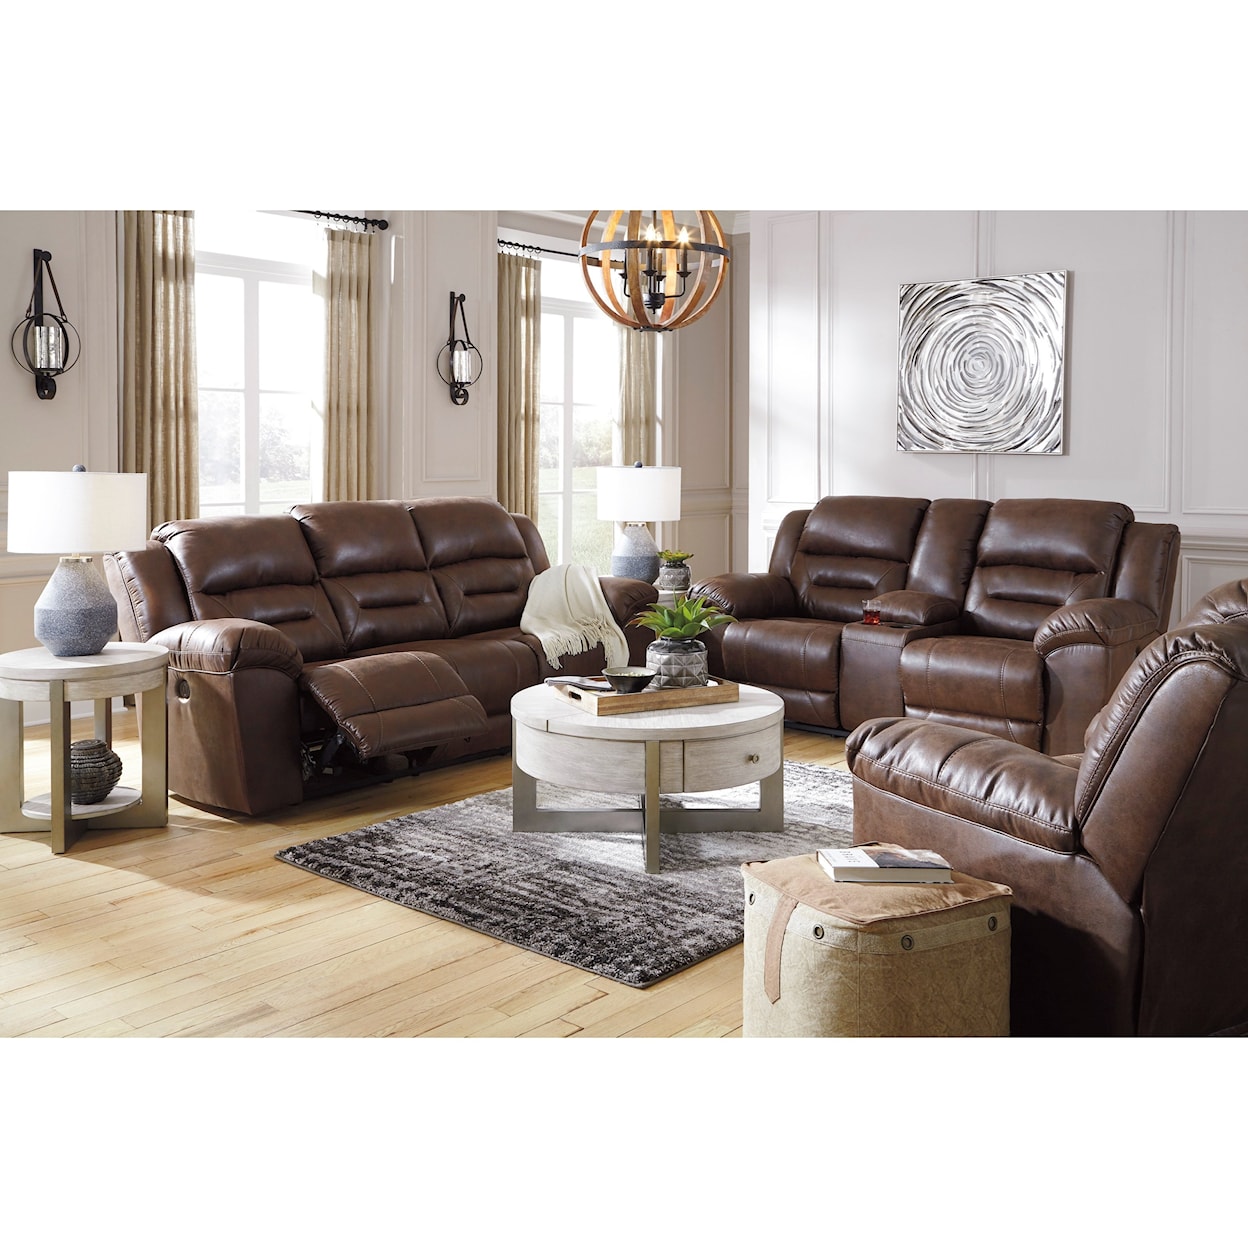 Signature Design by Ashley Furniture Stoneland Power Reclining Living Room Group